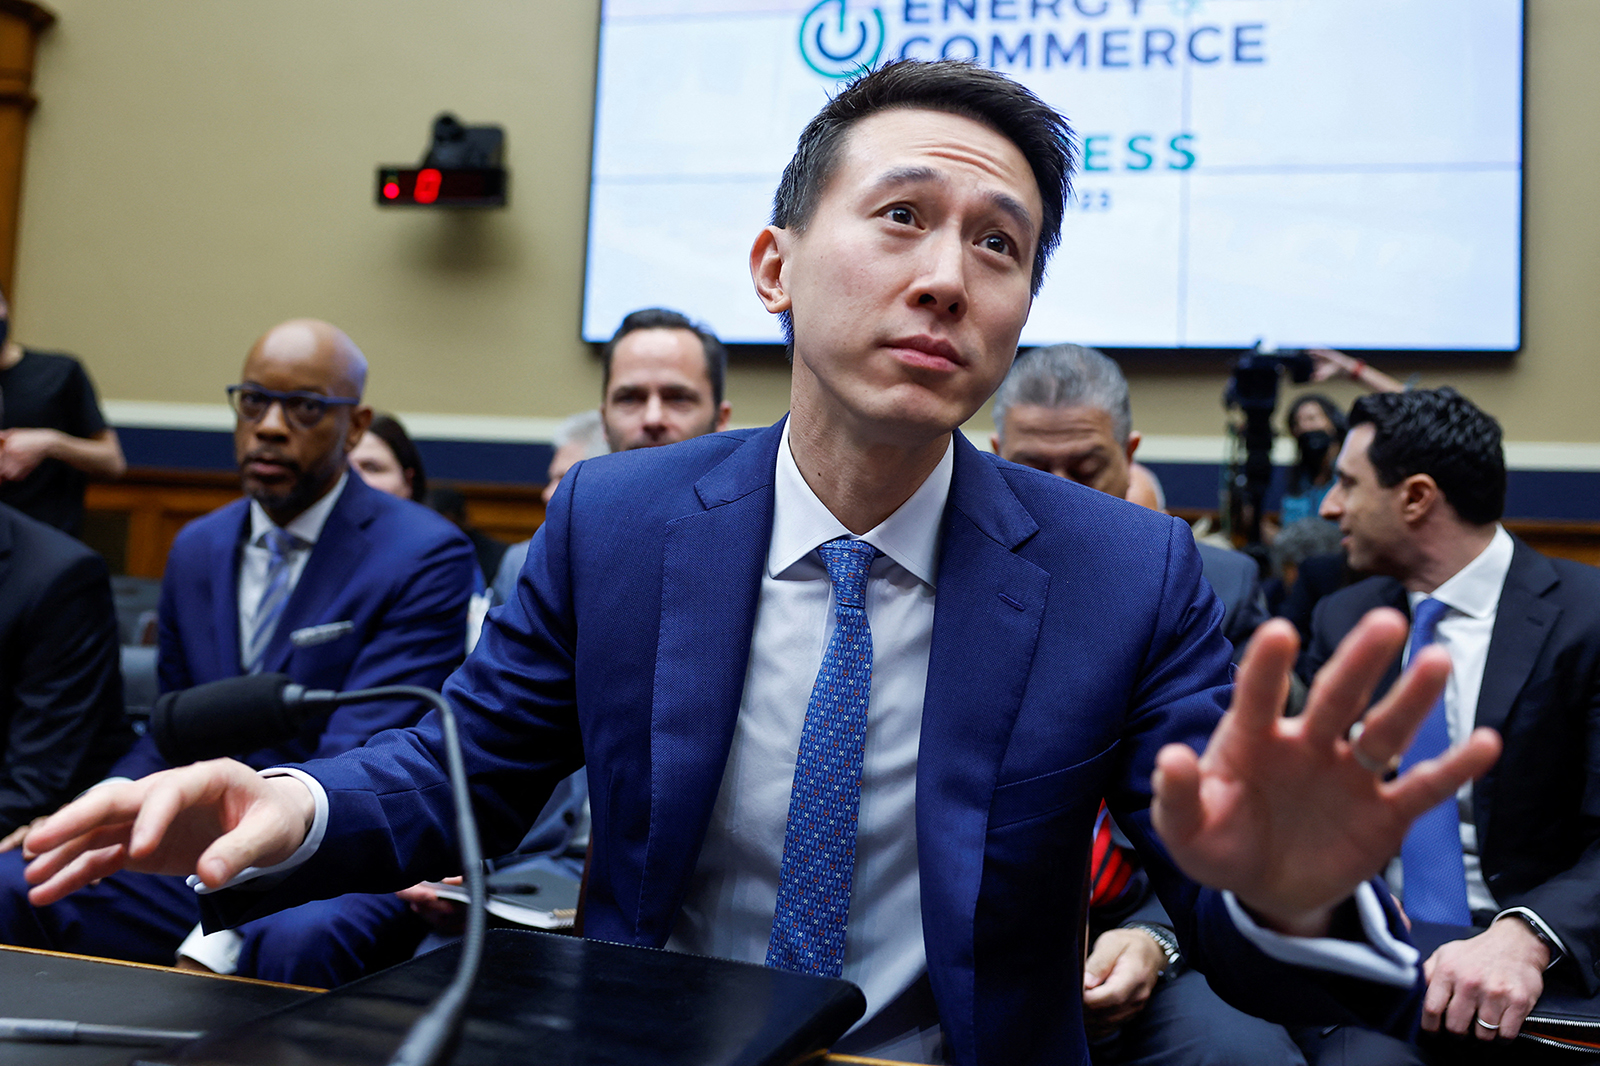 TikTok Chief Executive Shou Zi Chew reacts during a session for him to testify before a House Energy and Commerce Committee hearing entitled "TikTok: How Congress can Safeguard American Data Privacy and Protect Children from Online Harms," as lawmakers scrutinize the Chinese-owned video-sharing app, on Capitol Hill today.